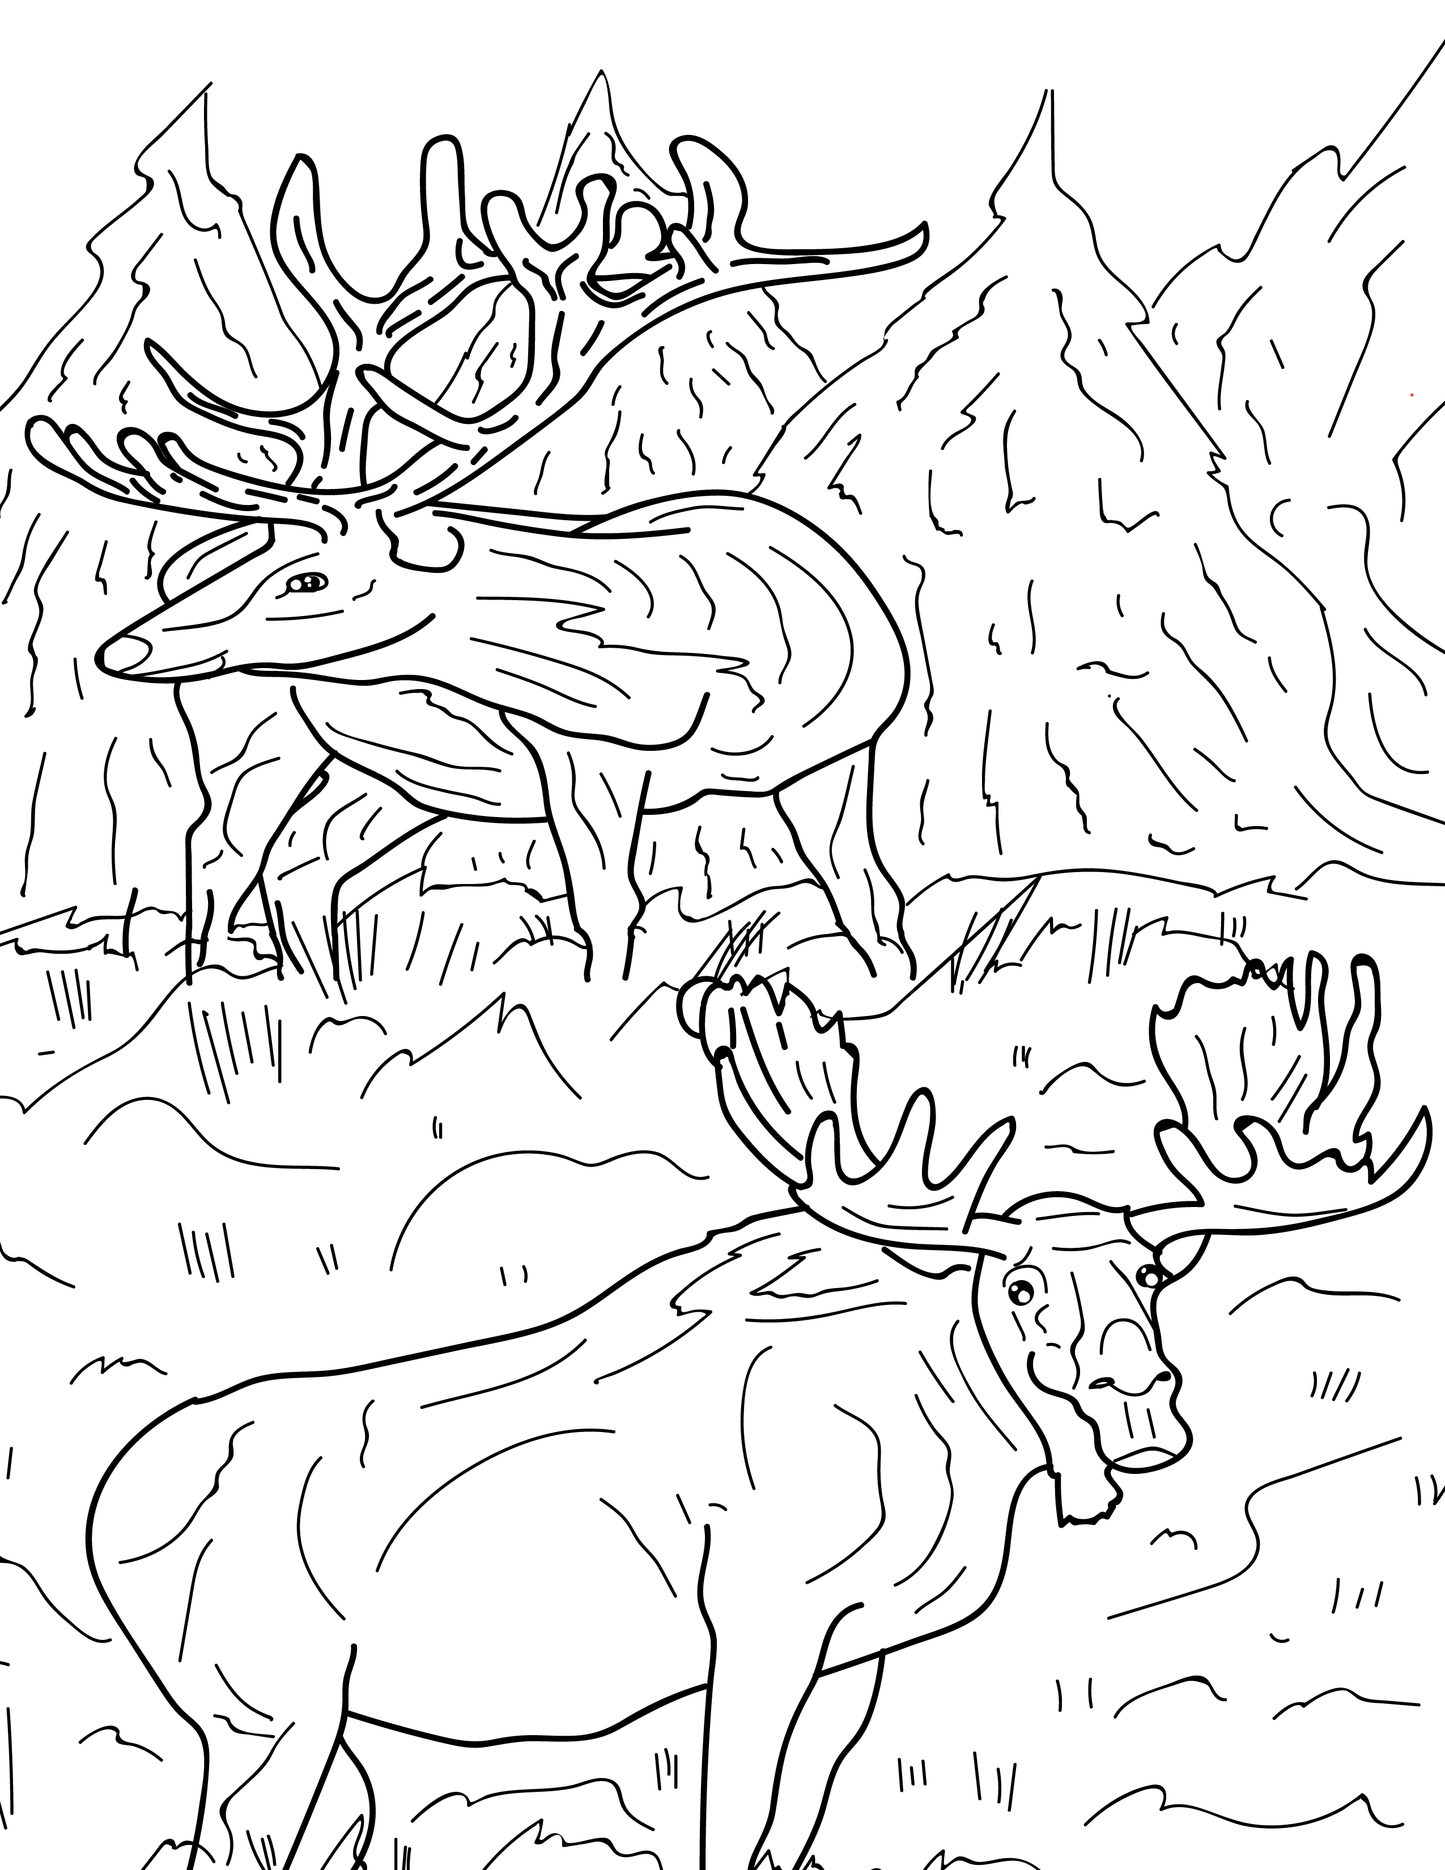 Pacific Northwest Wildlife Educational Coloring Book